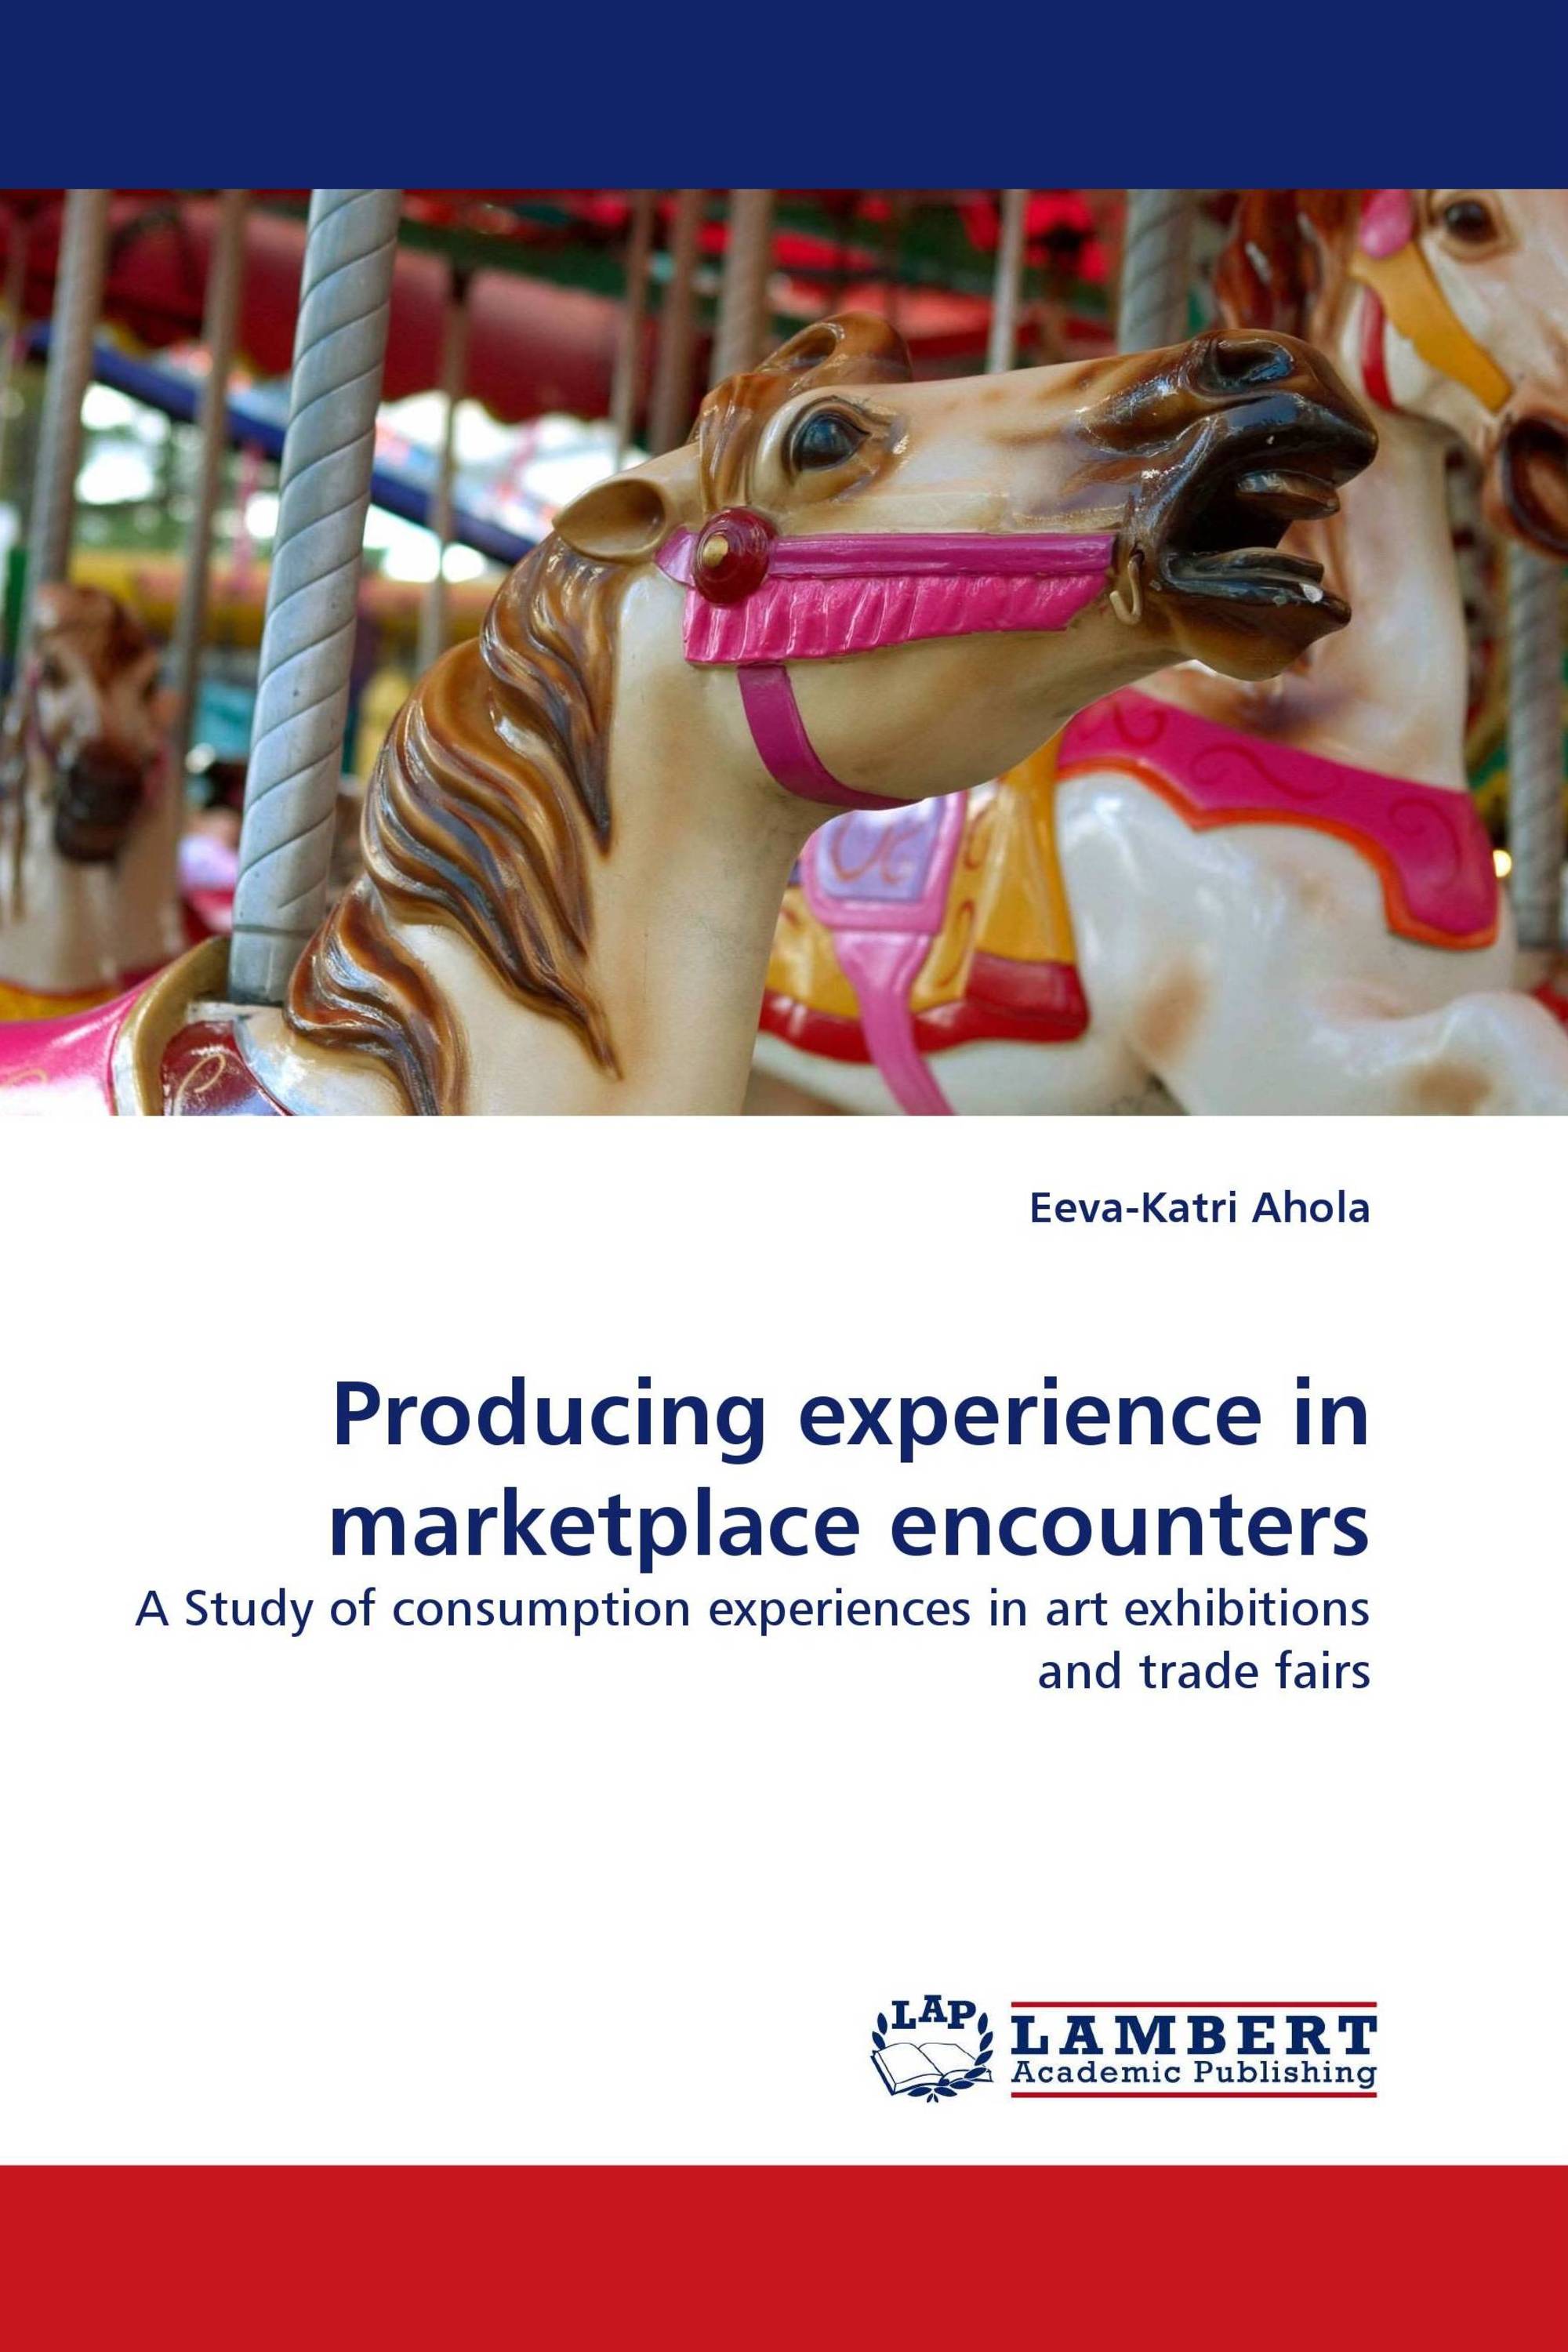 Producing experience in marketplace encounters